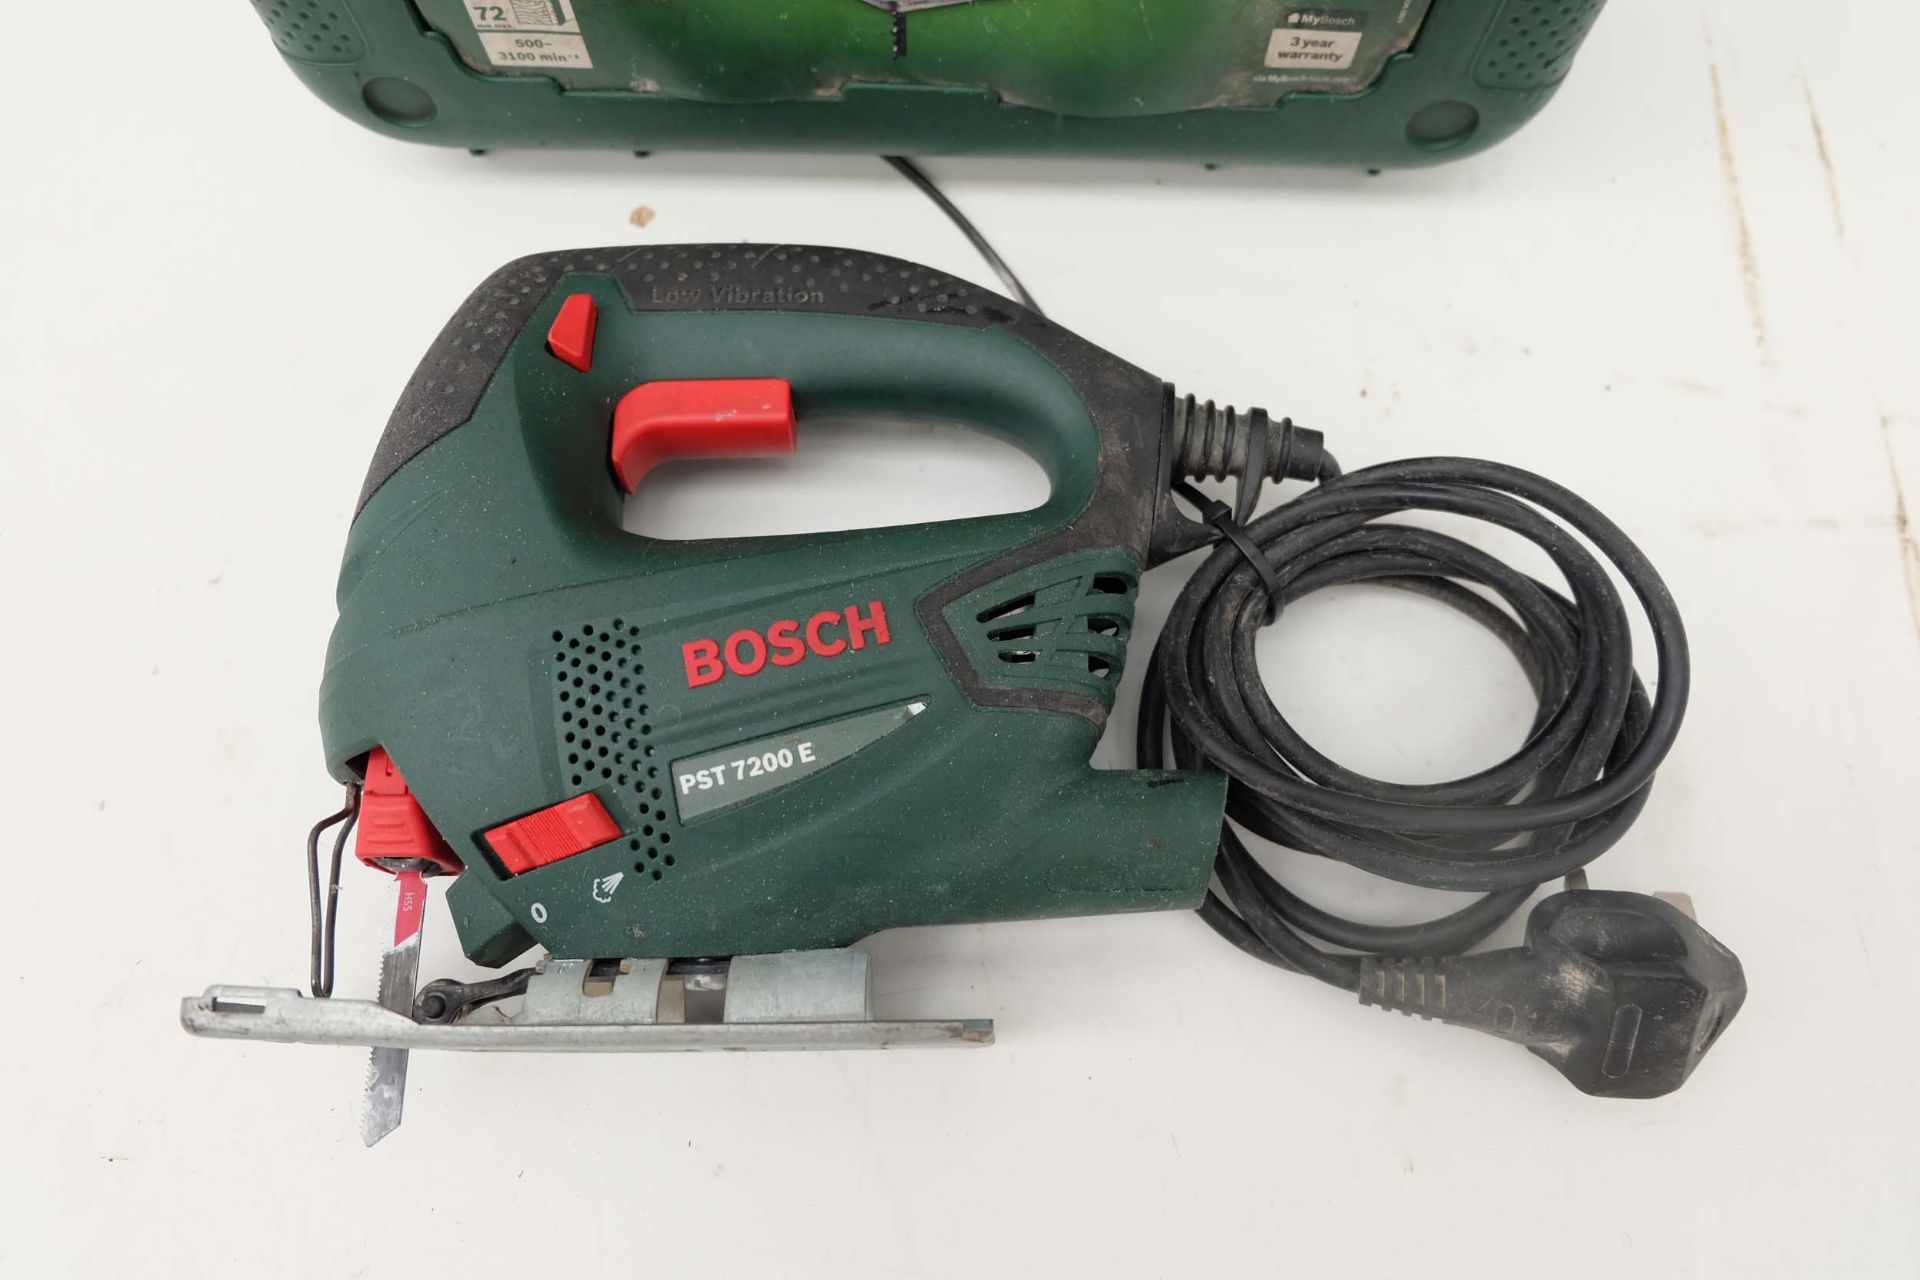 Bosch PST 7200E Jigsaw. Max Cutting Depth 72mm. Single Phase 500W. With Carry Case.